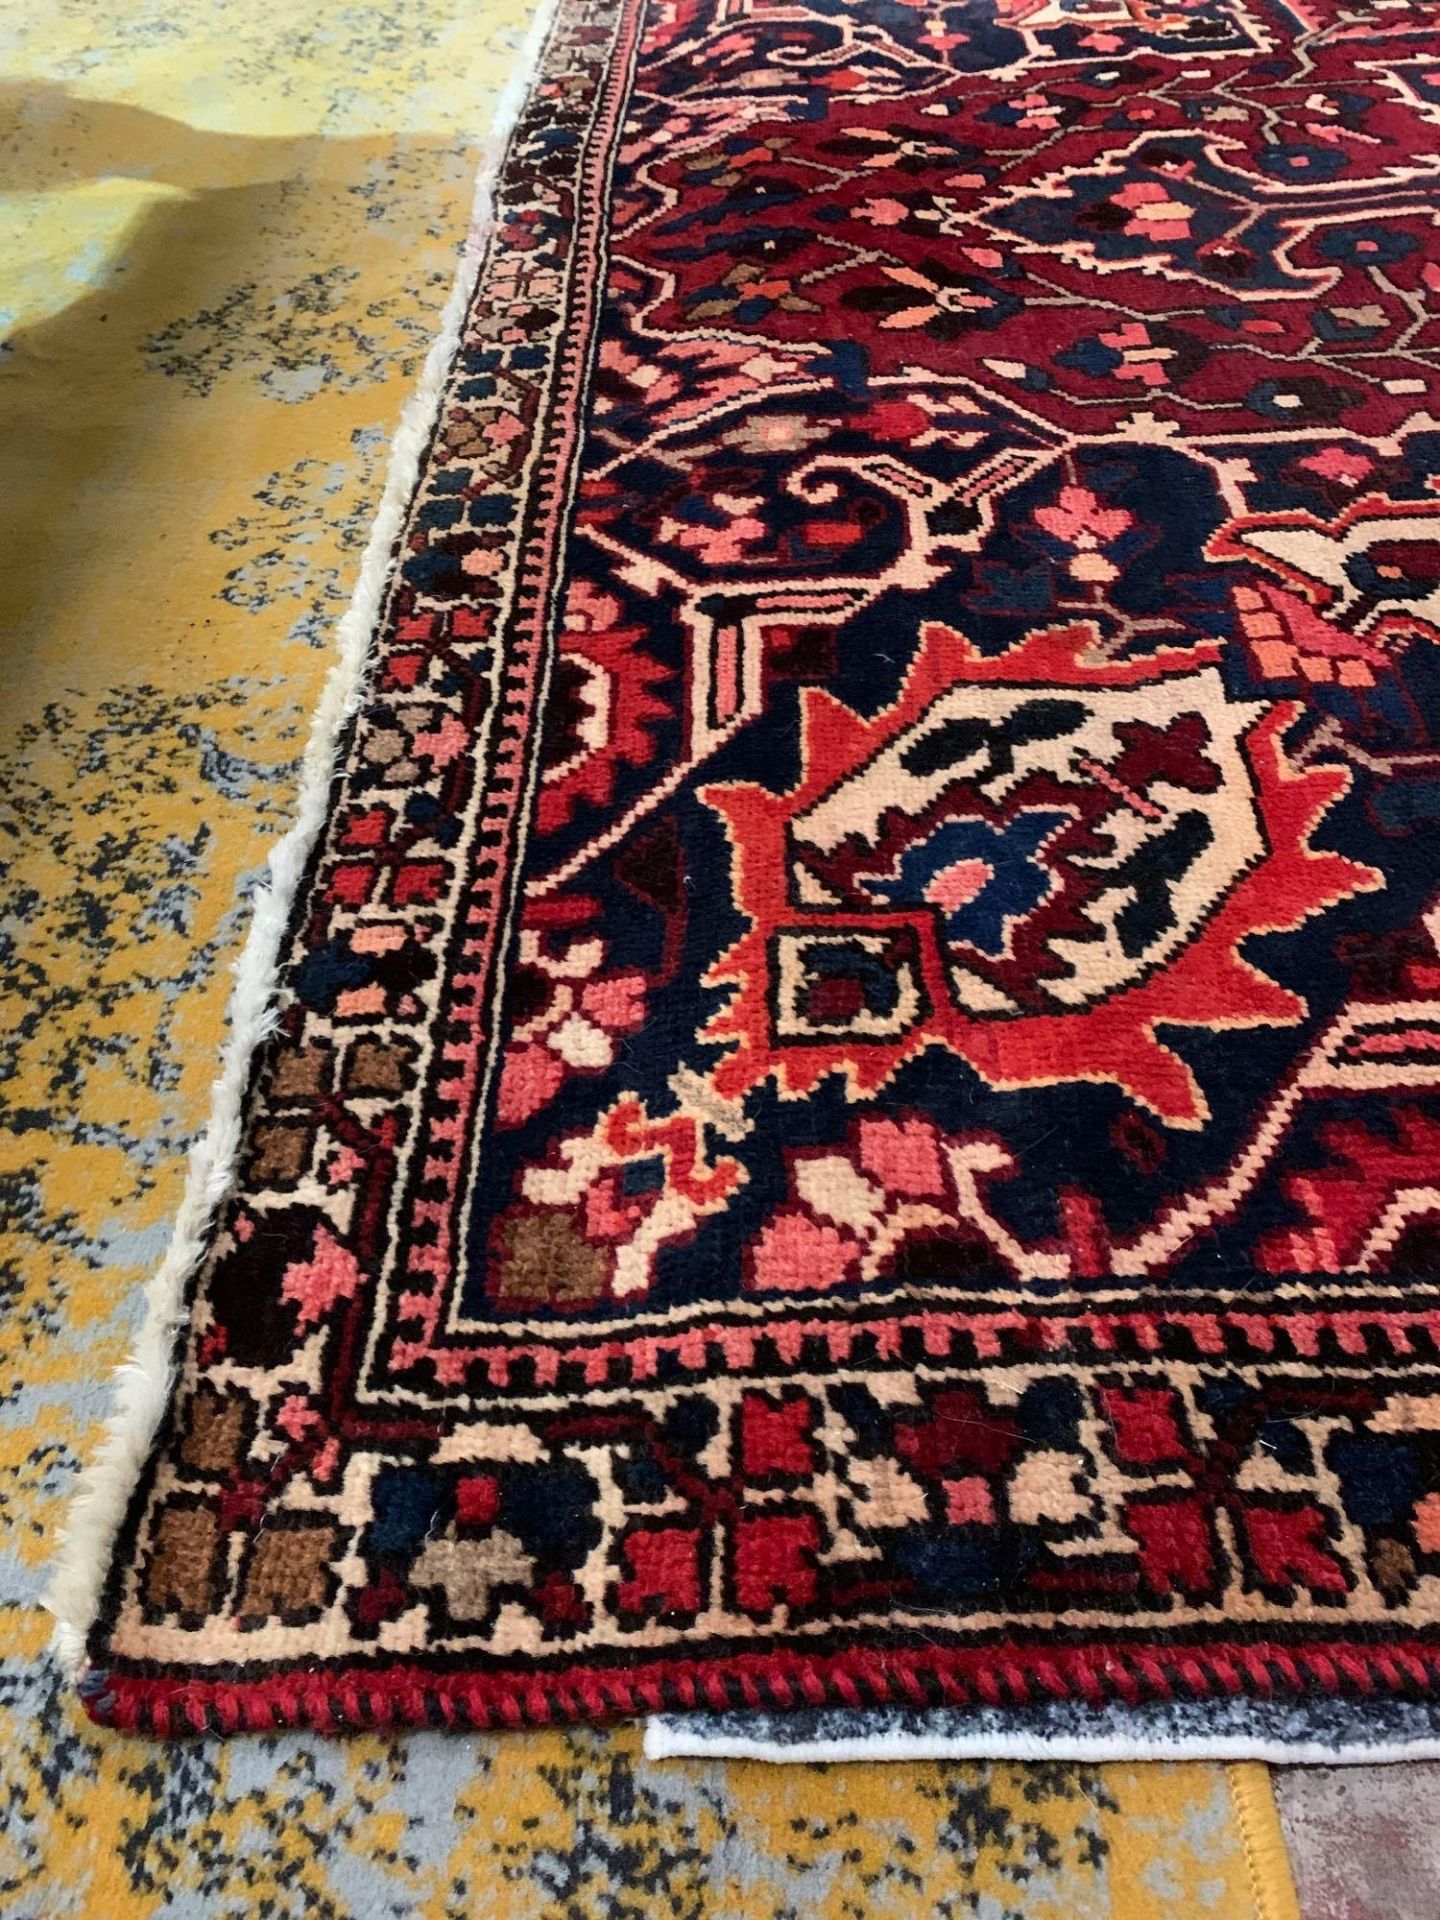 Azerbaijani Style Carpet Wool Pile Quality And High Artistic Value Hand Made Red Ground With A - Image 6 of 8